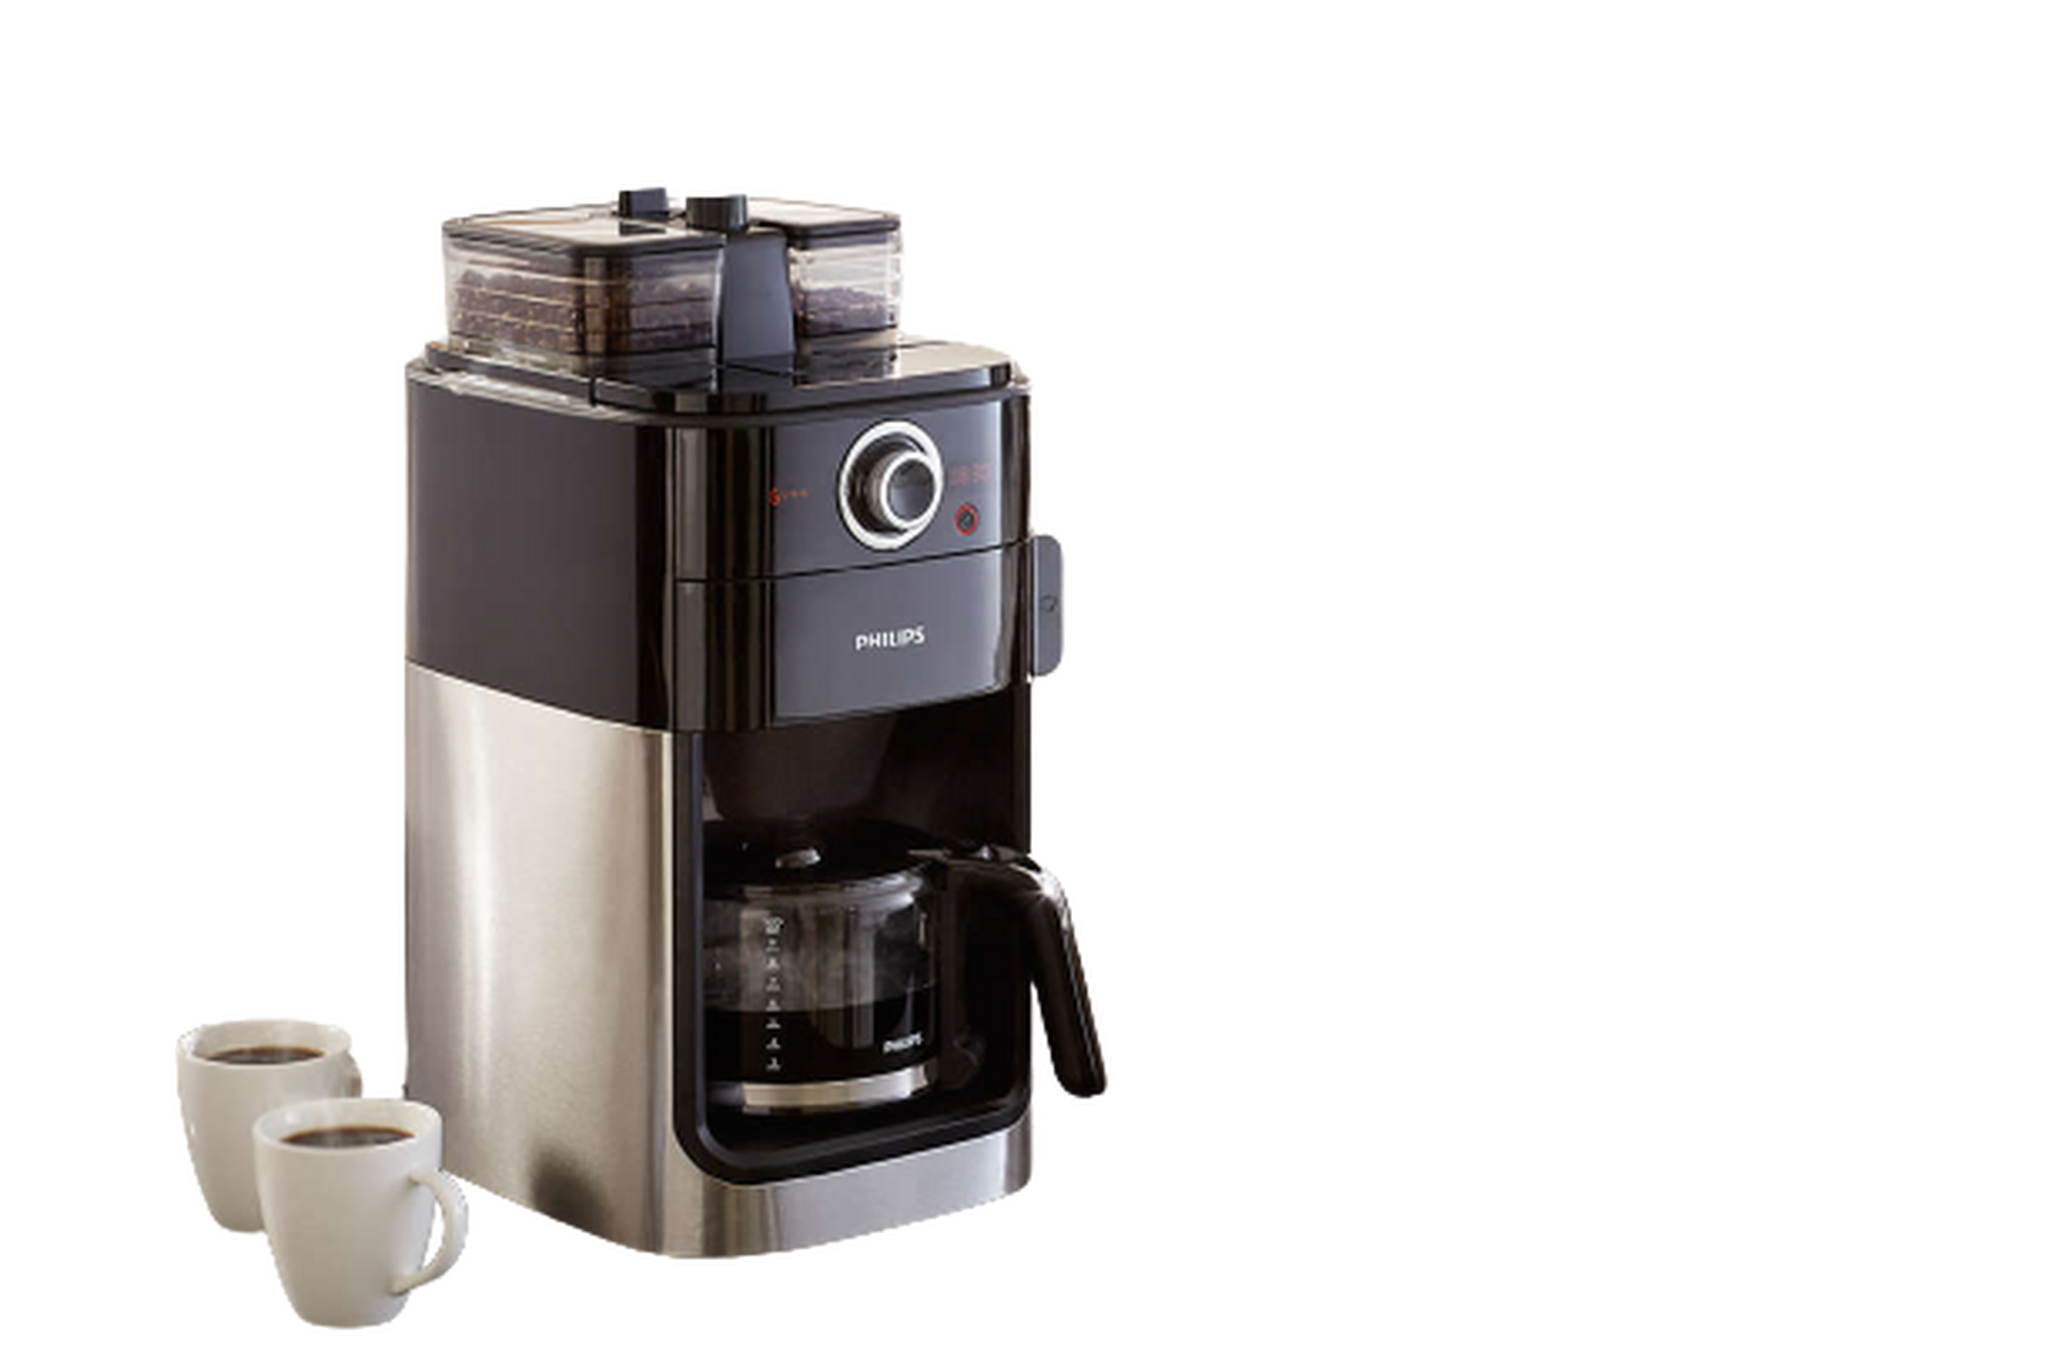 Philips Grind and Brew Coffee Maker, 1000W, 1.2L, HD7762 - Black/Silver